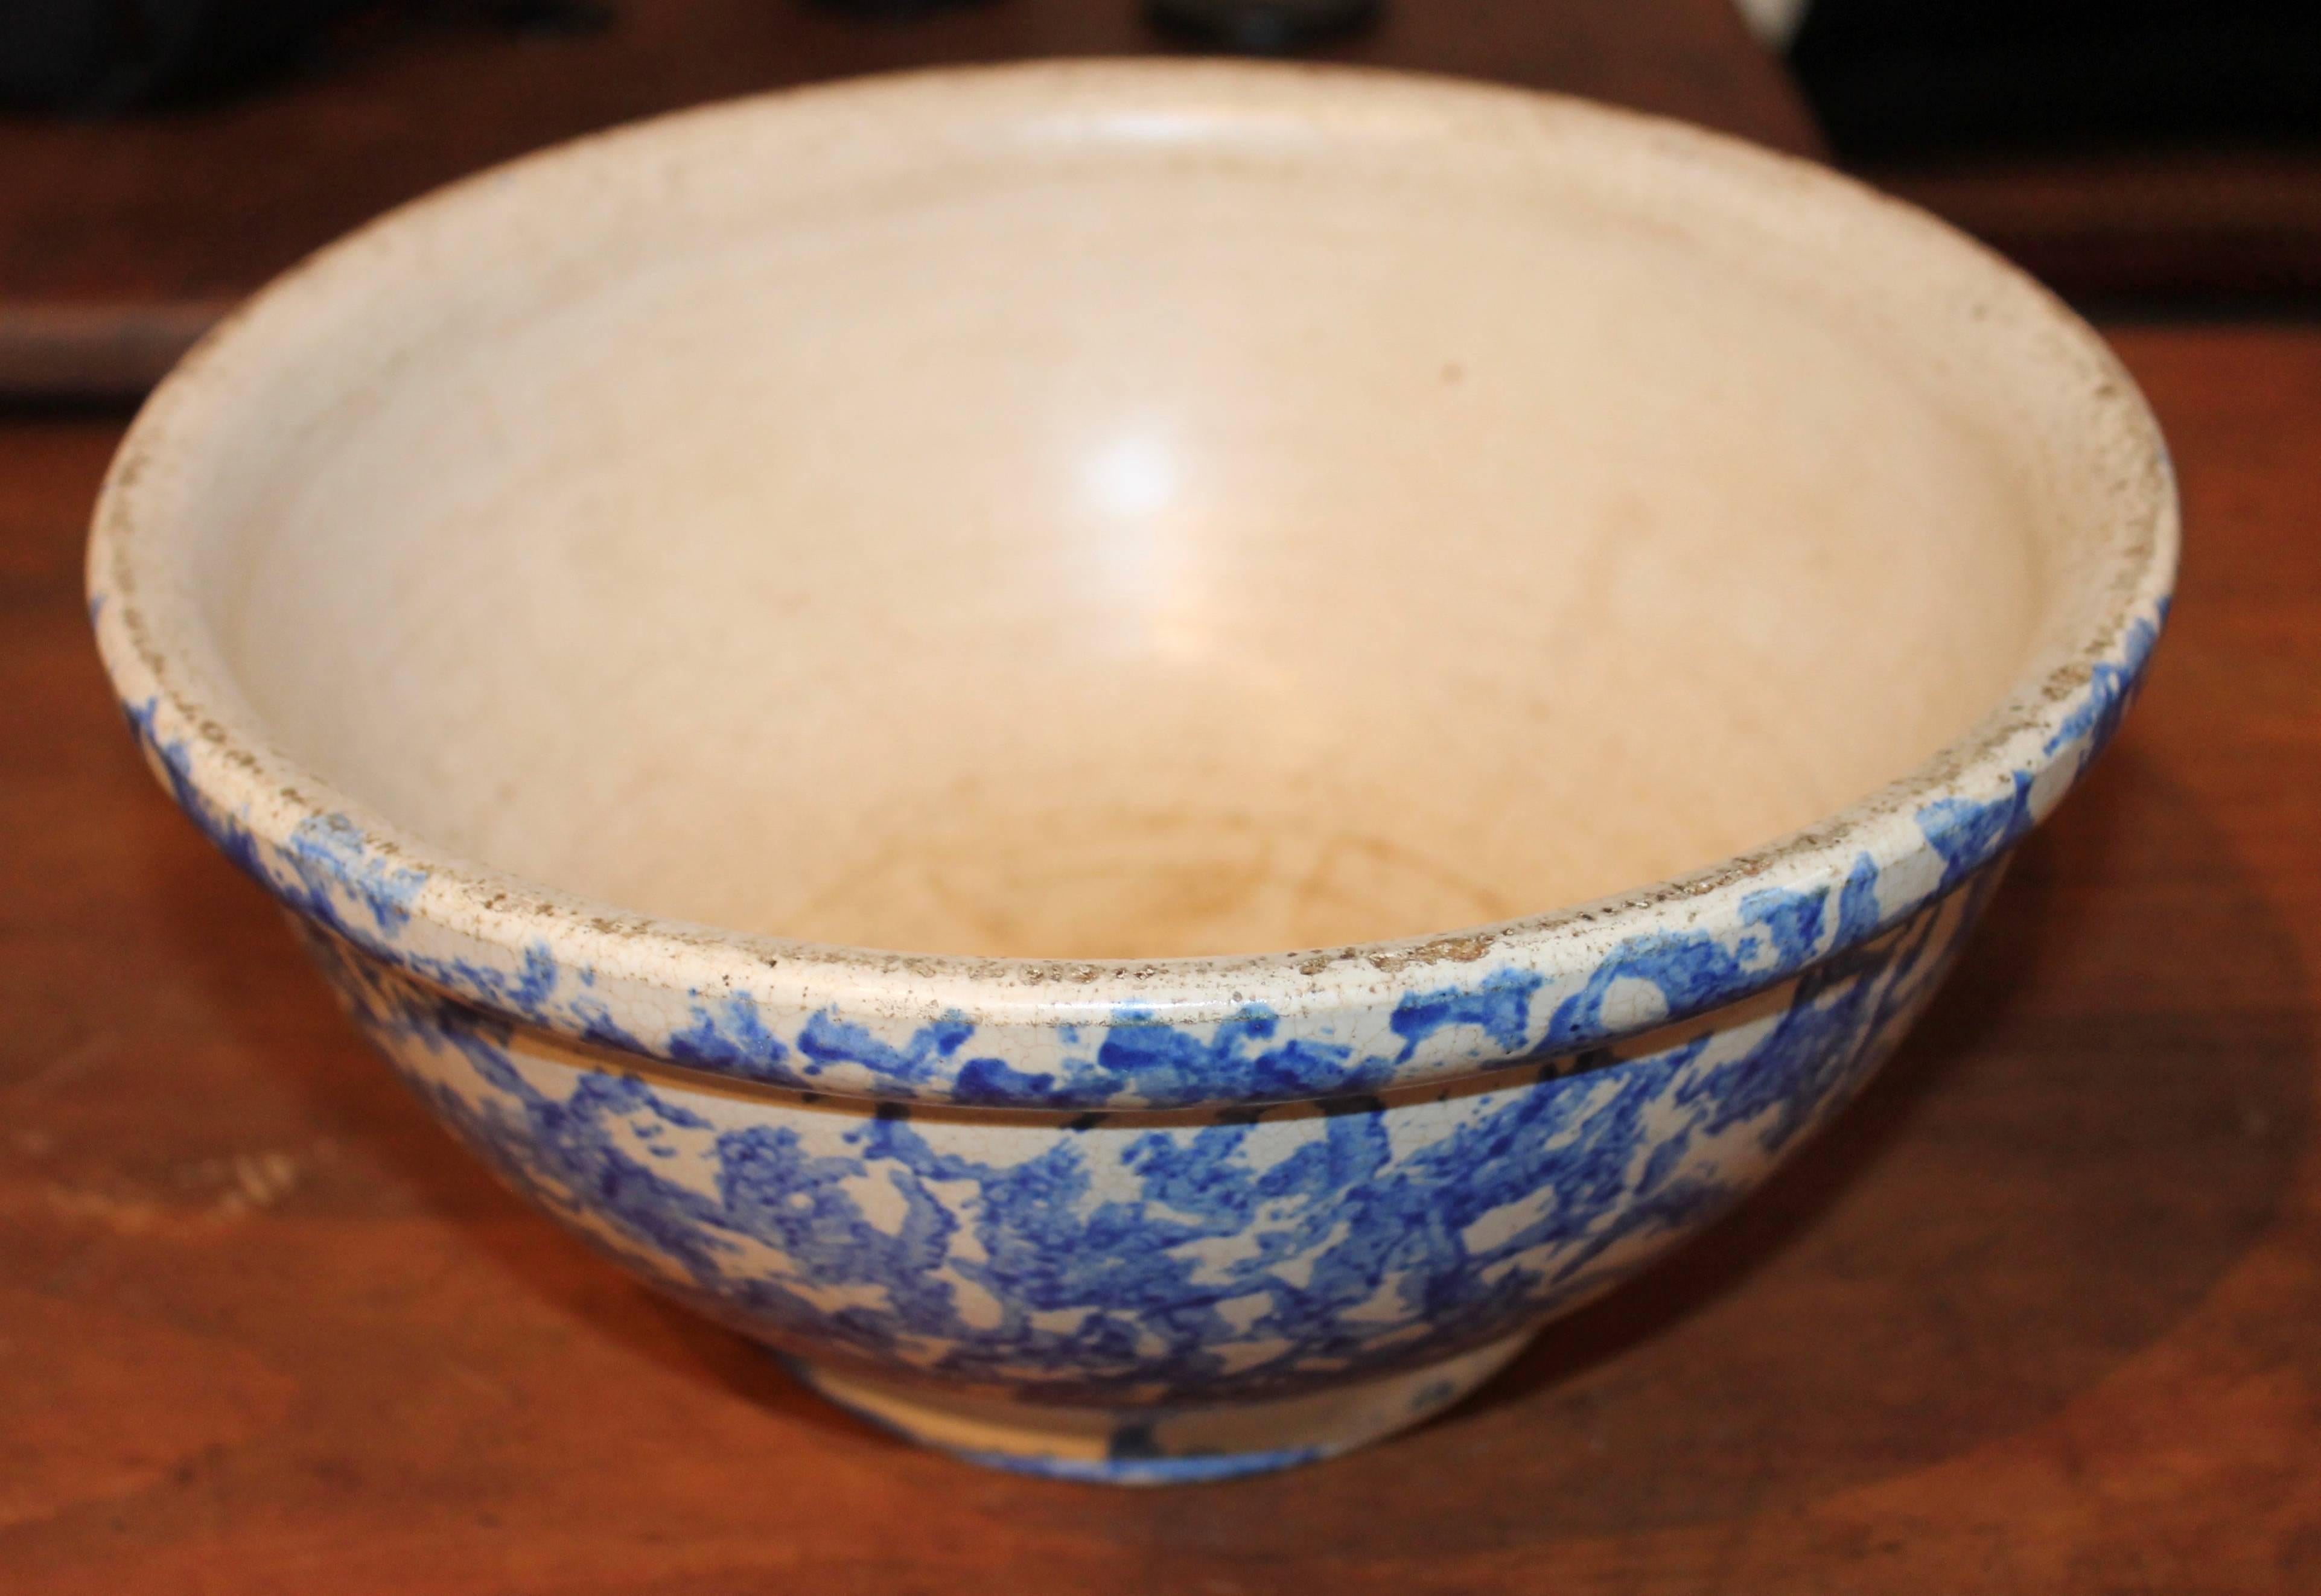 This amazing crazed 19th century spongeware mixing bowl is signed on the base Elsinore Pottery, California. It is most unusual to find any type of sponge ware pottery signed. The condition is good with minor crazing.